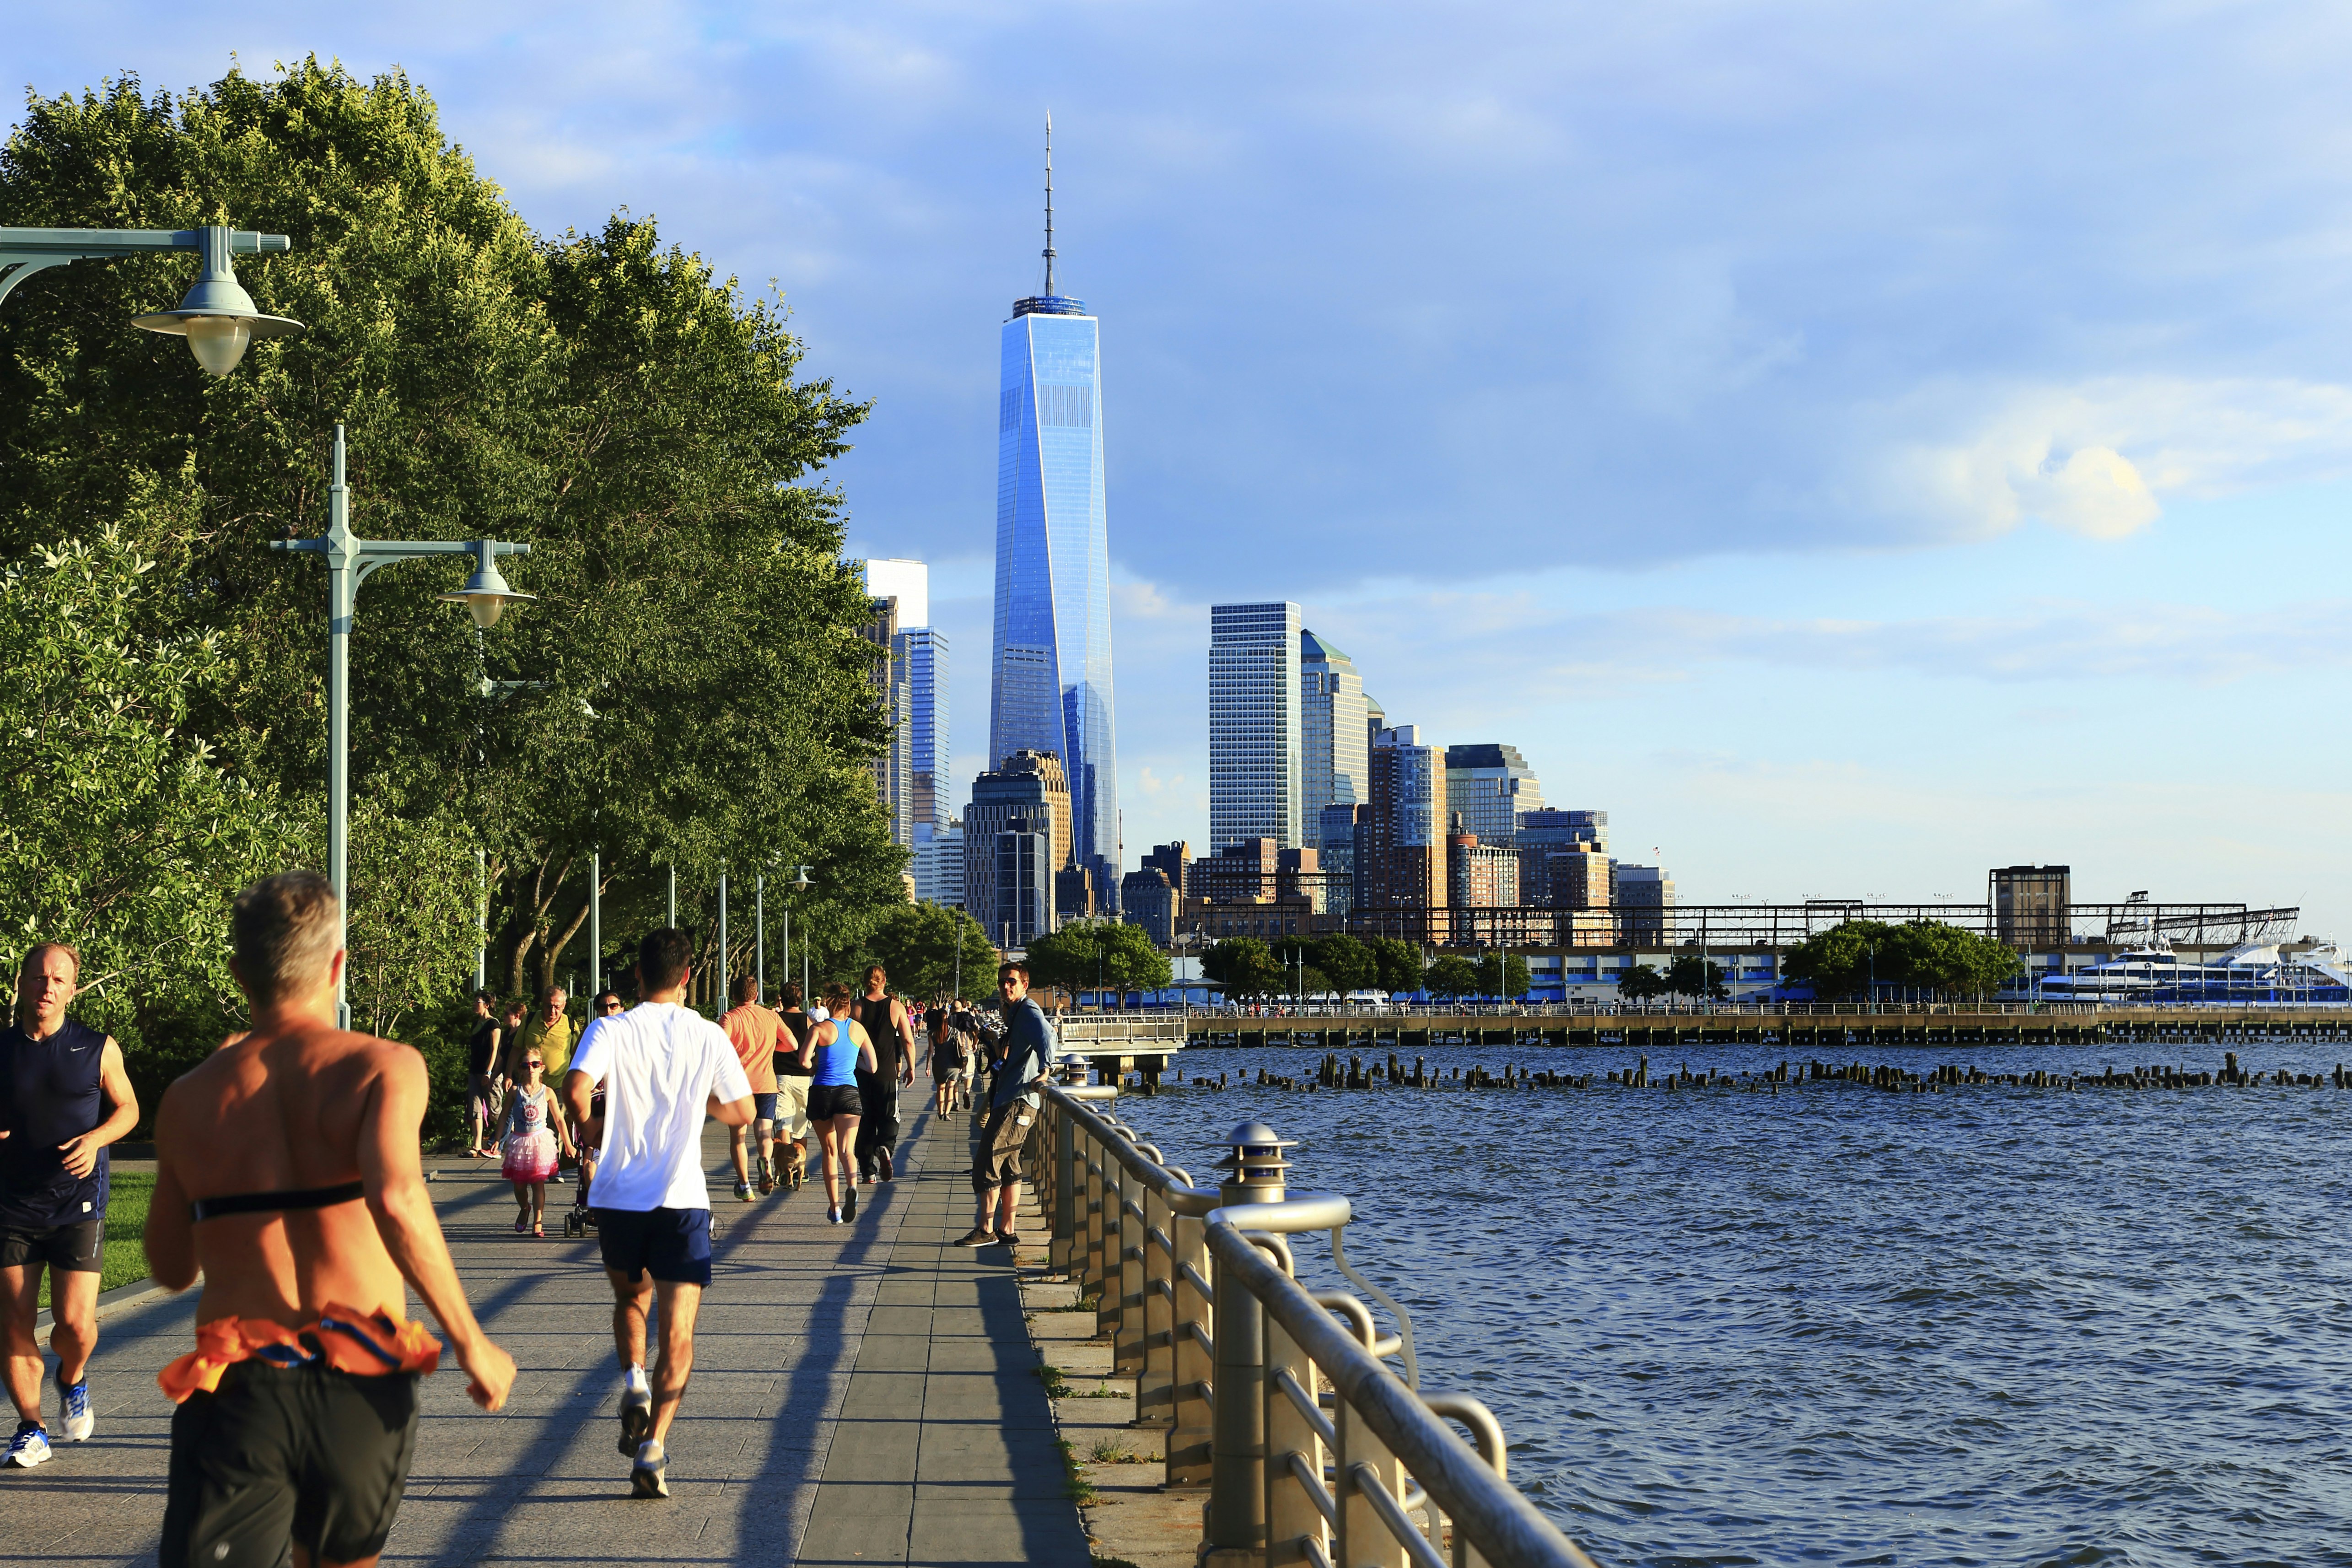 Many people are jogging, running and walking along the Hudson River Greenway. The path runs alongside the Hudson River, and the other side is line with trees. The One World Trade Centre can be seen in the distance.